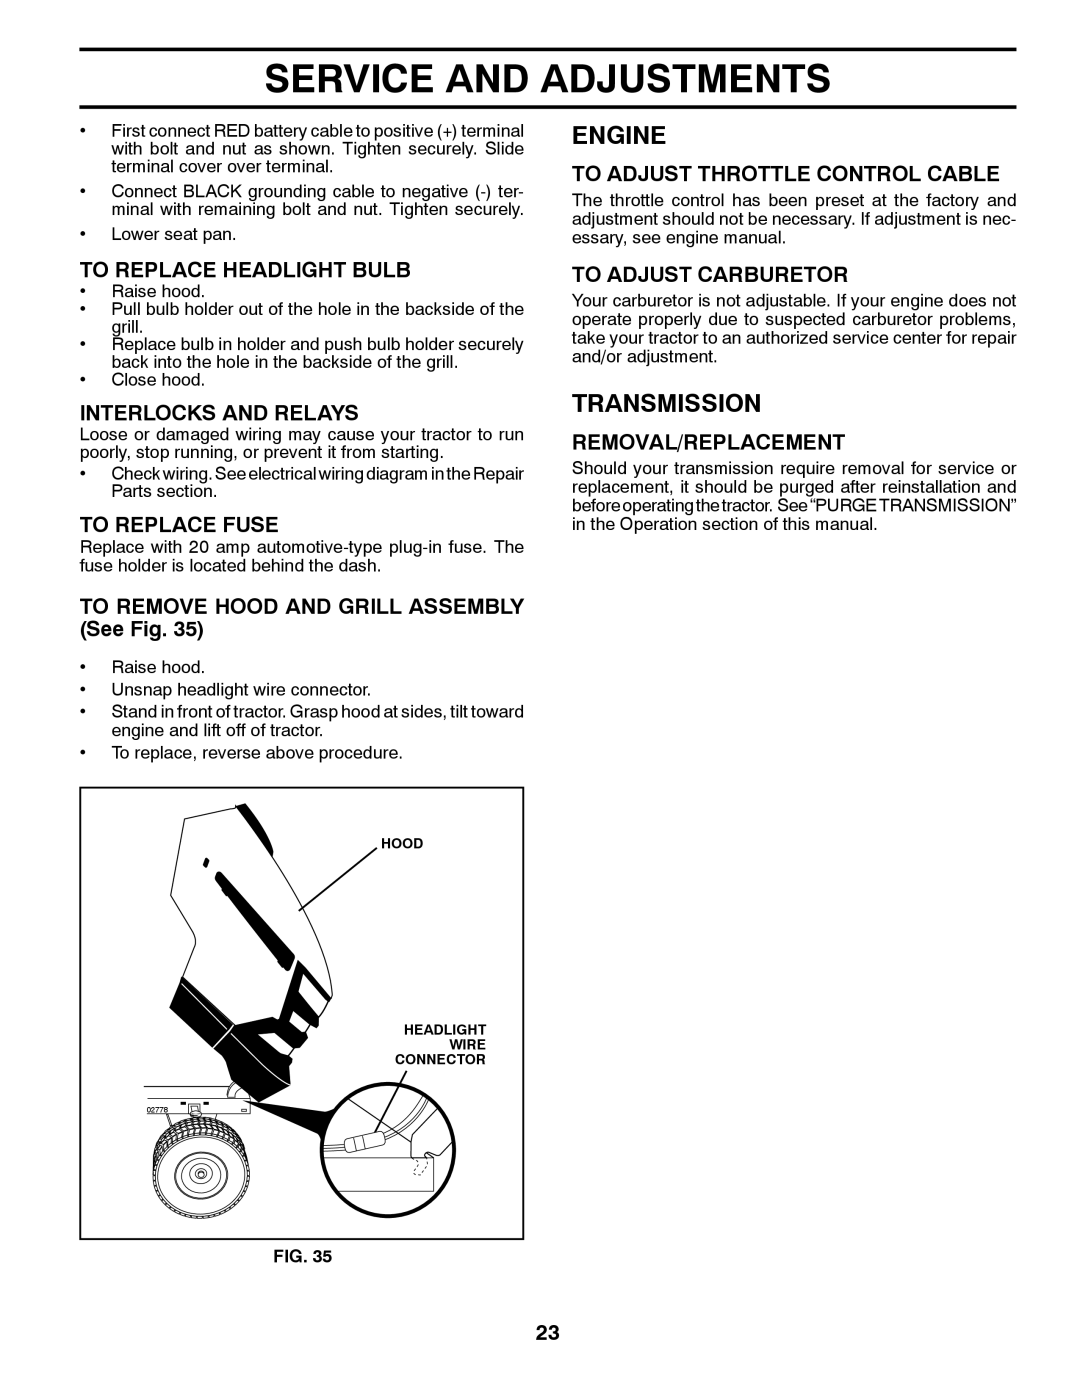 Husqvarna 532 42 41-94 owner manual Transmission, To Replace Headlight Bulb, Interlocks And Relays, To Replace Fuse, Engine 